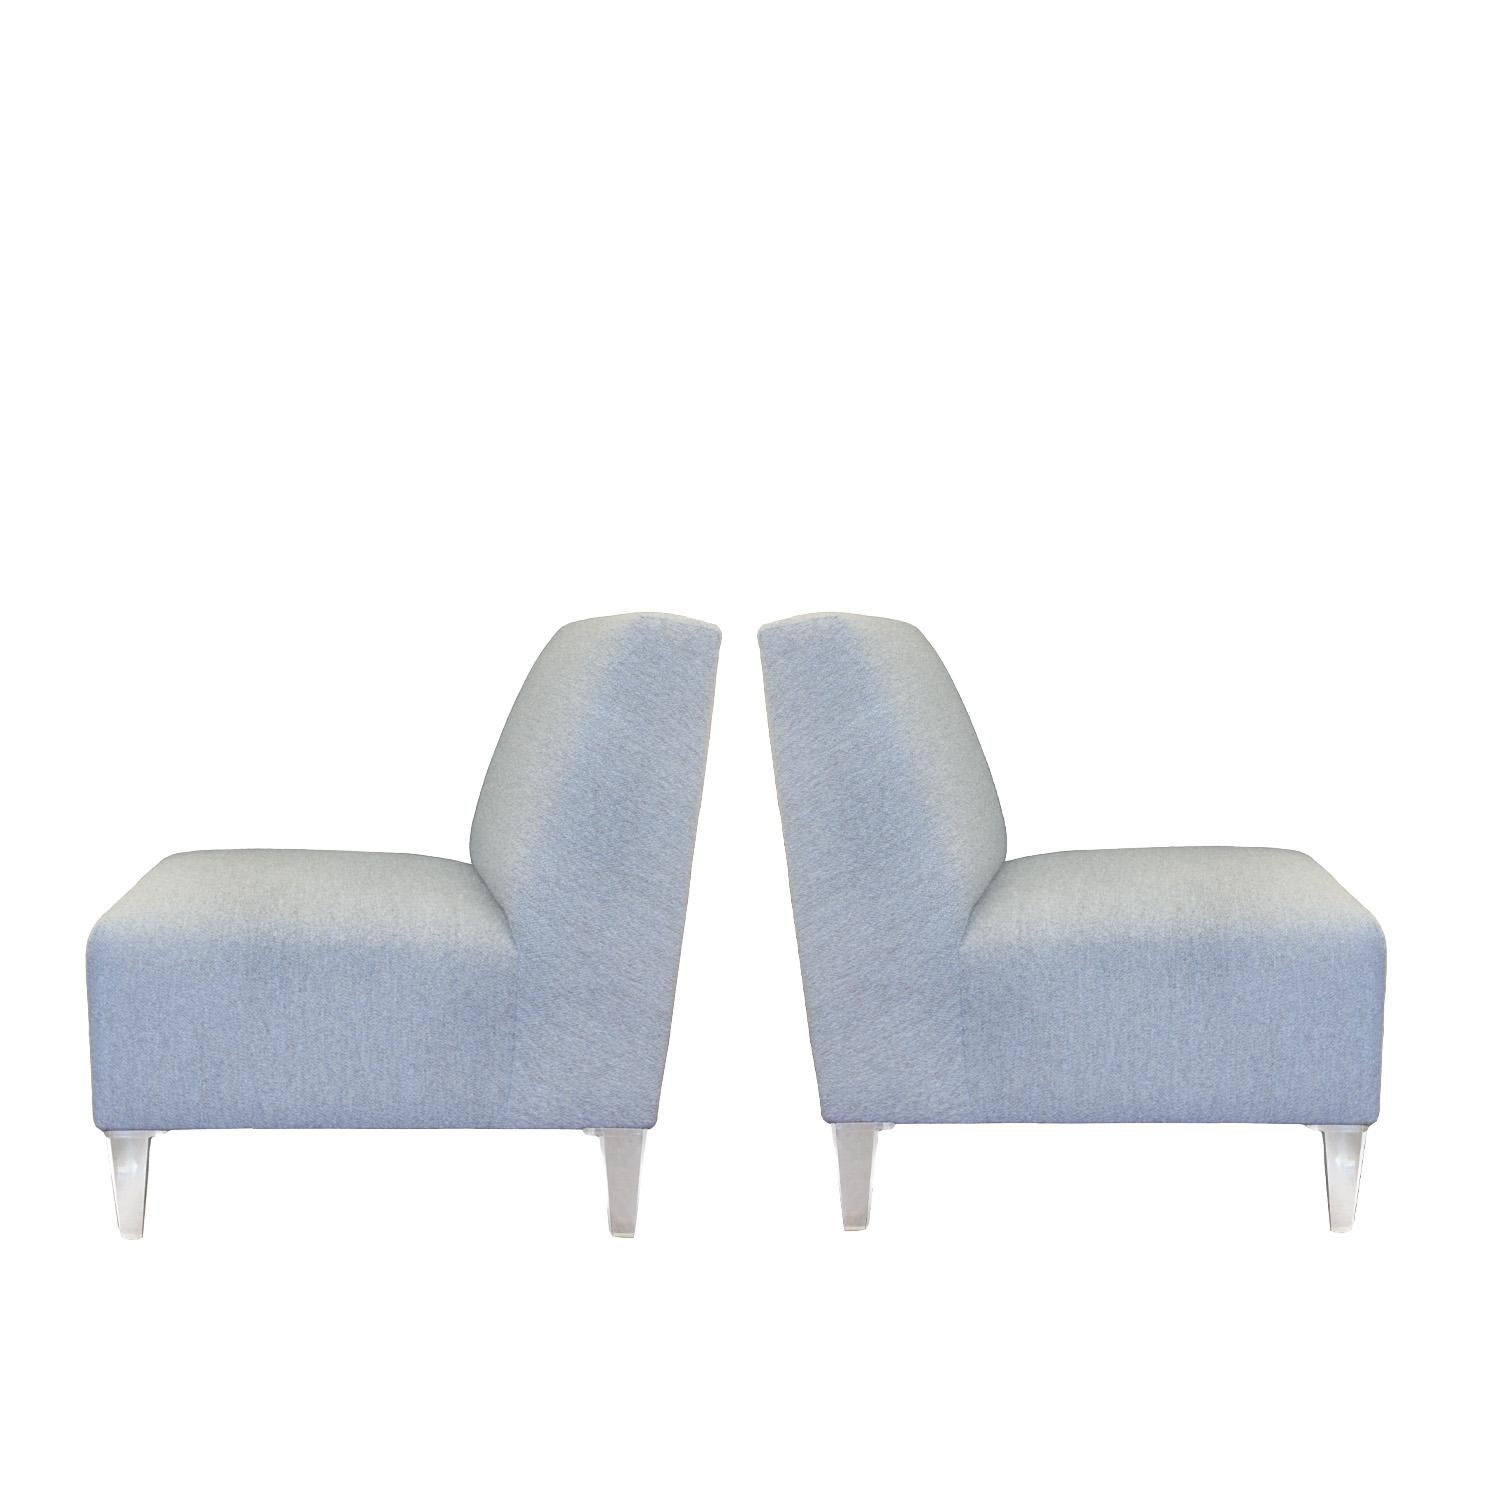 Modern Elegant Pair of Slipper Chairs with Lucite Legs For Sale